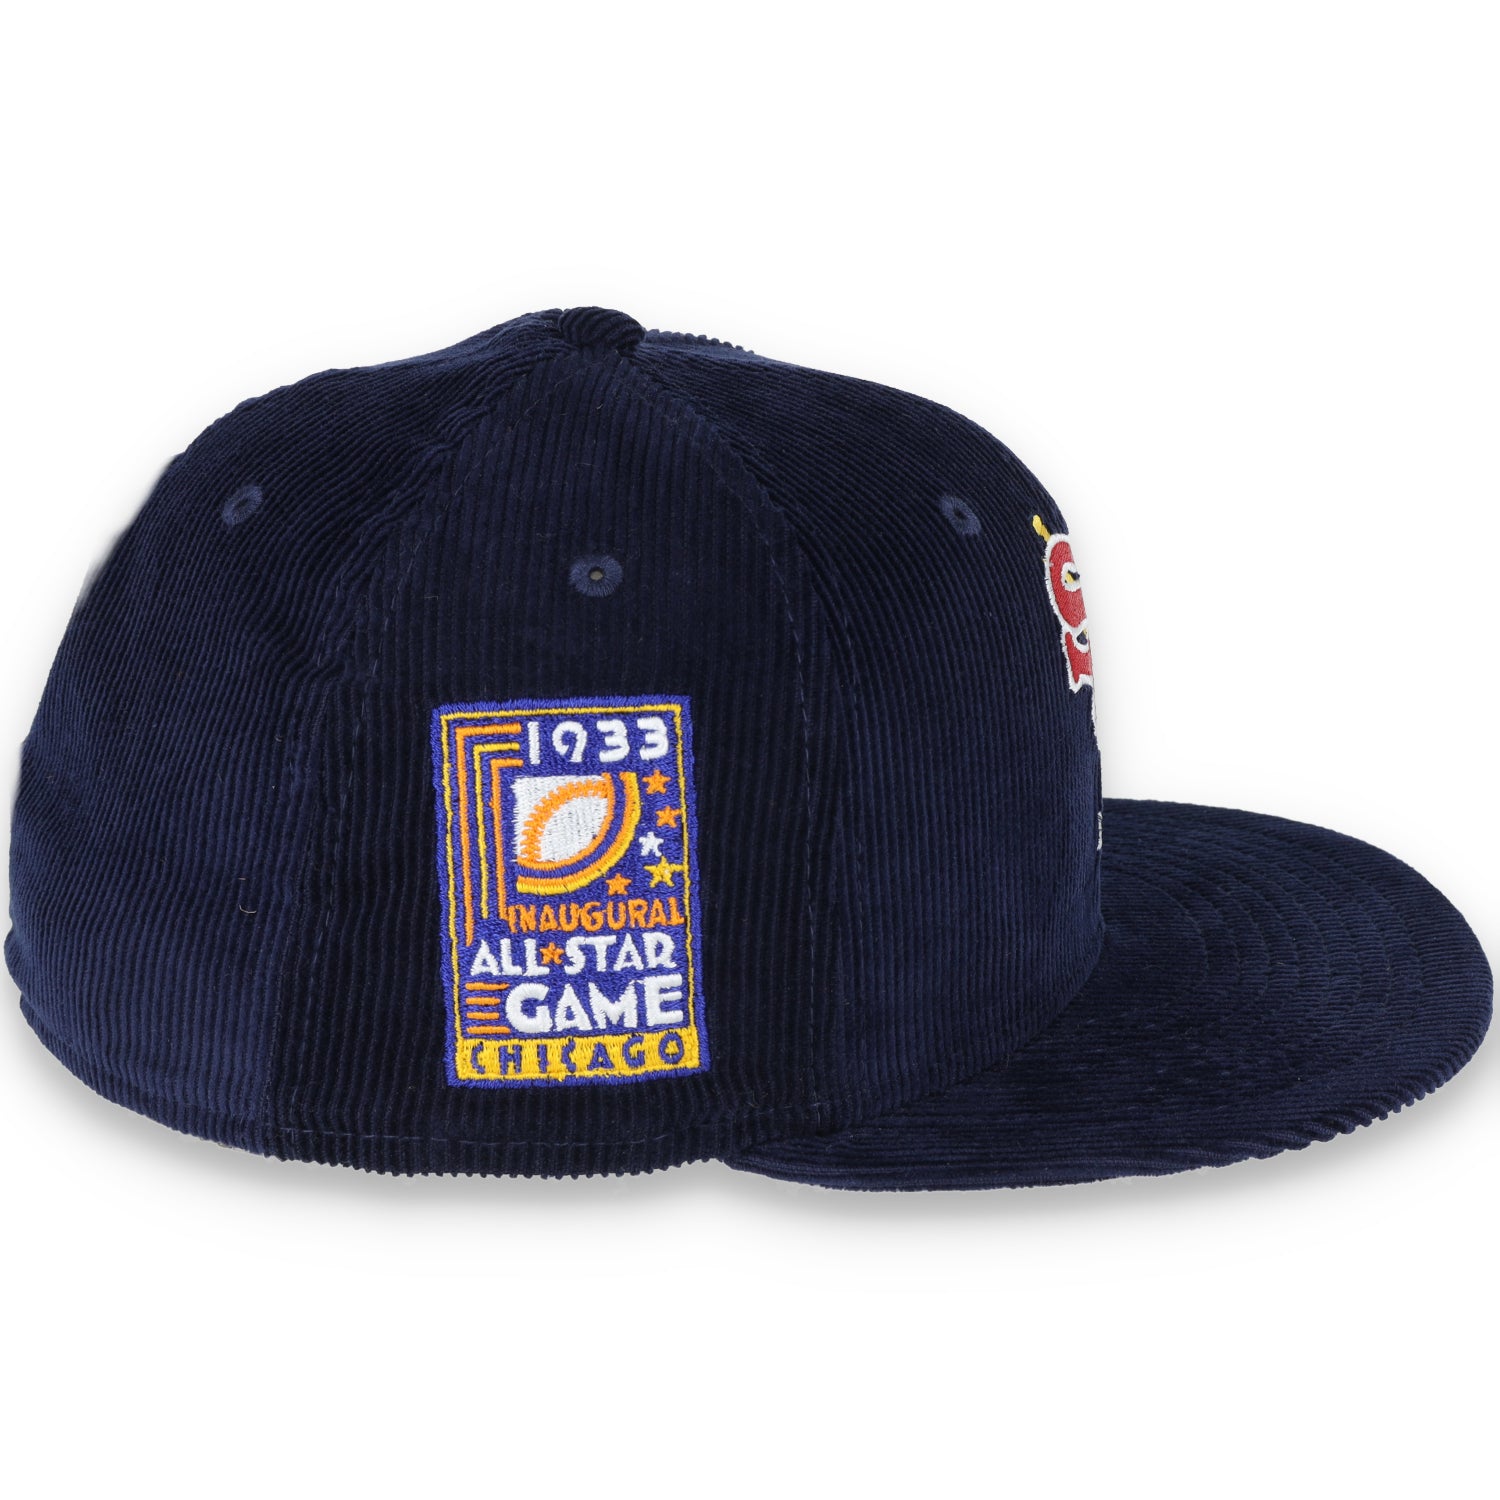 New Era Boston Red Sox Side Patch Corduroy Fitted Hat-Navy Blue